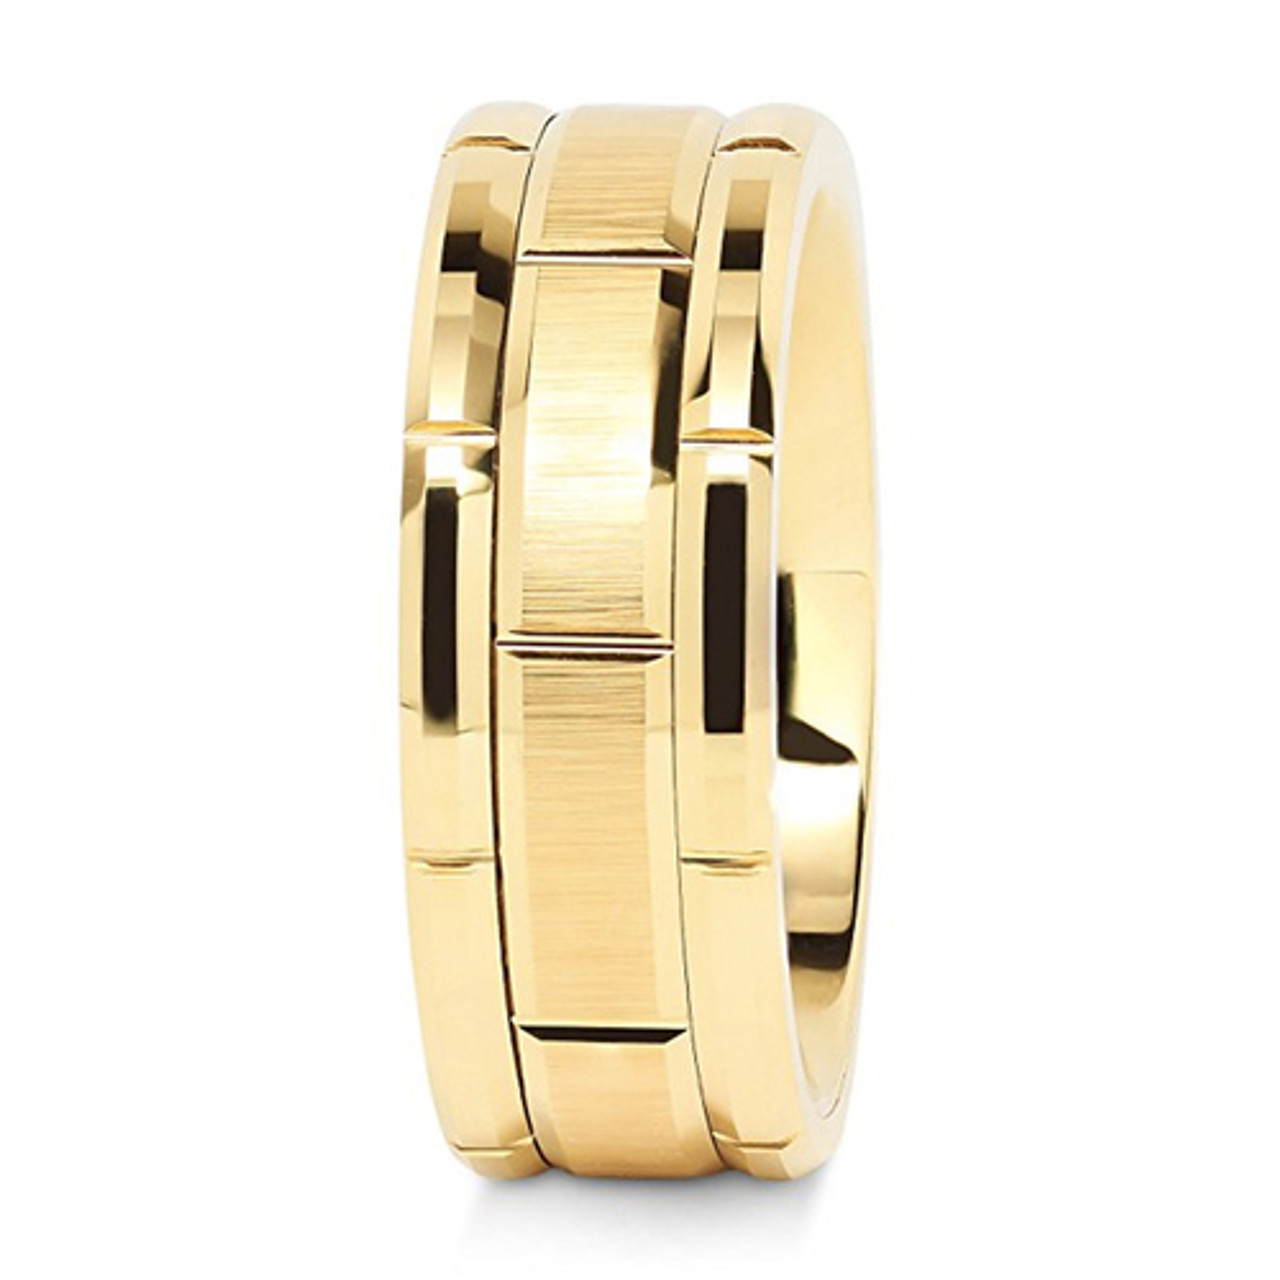 (8mm) Unisex or Men's Tungsten Carbide Wedding Ring Band. 14K Yellow Gold Brick Pattern Comfort Fit Grooved Ring.